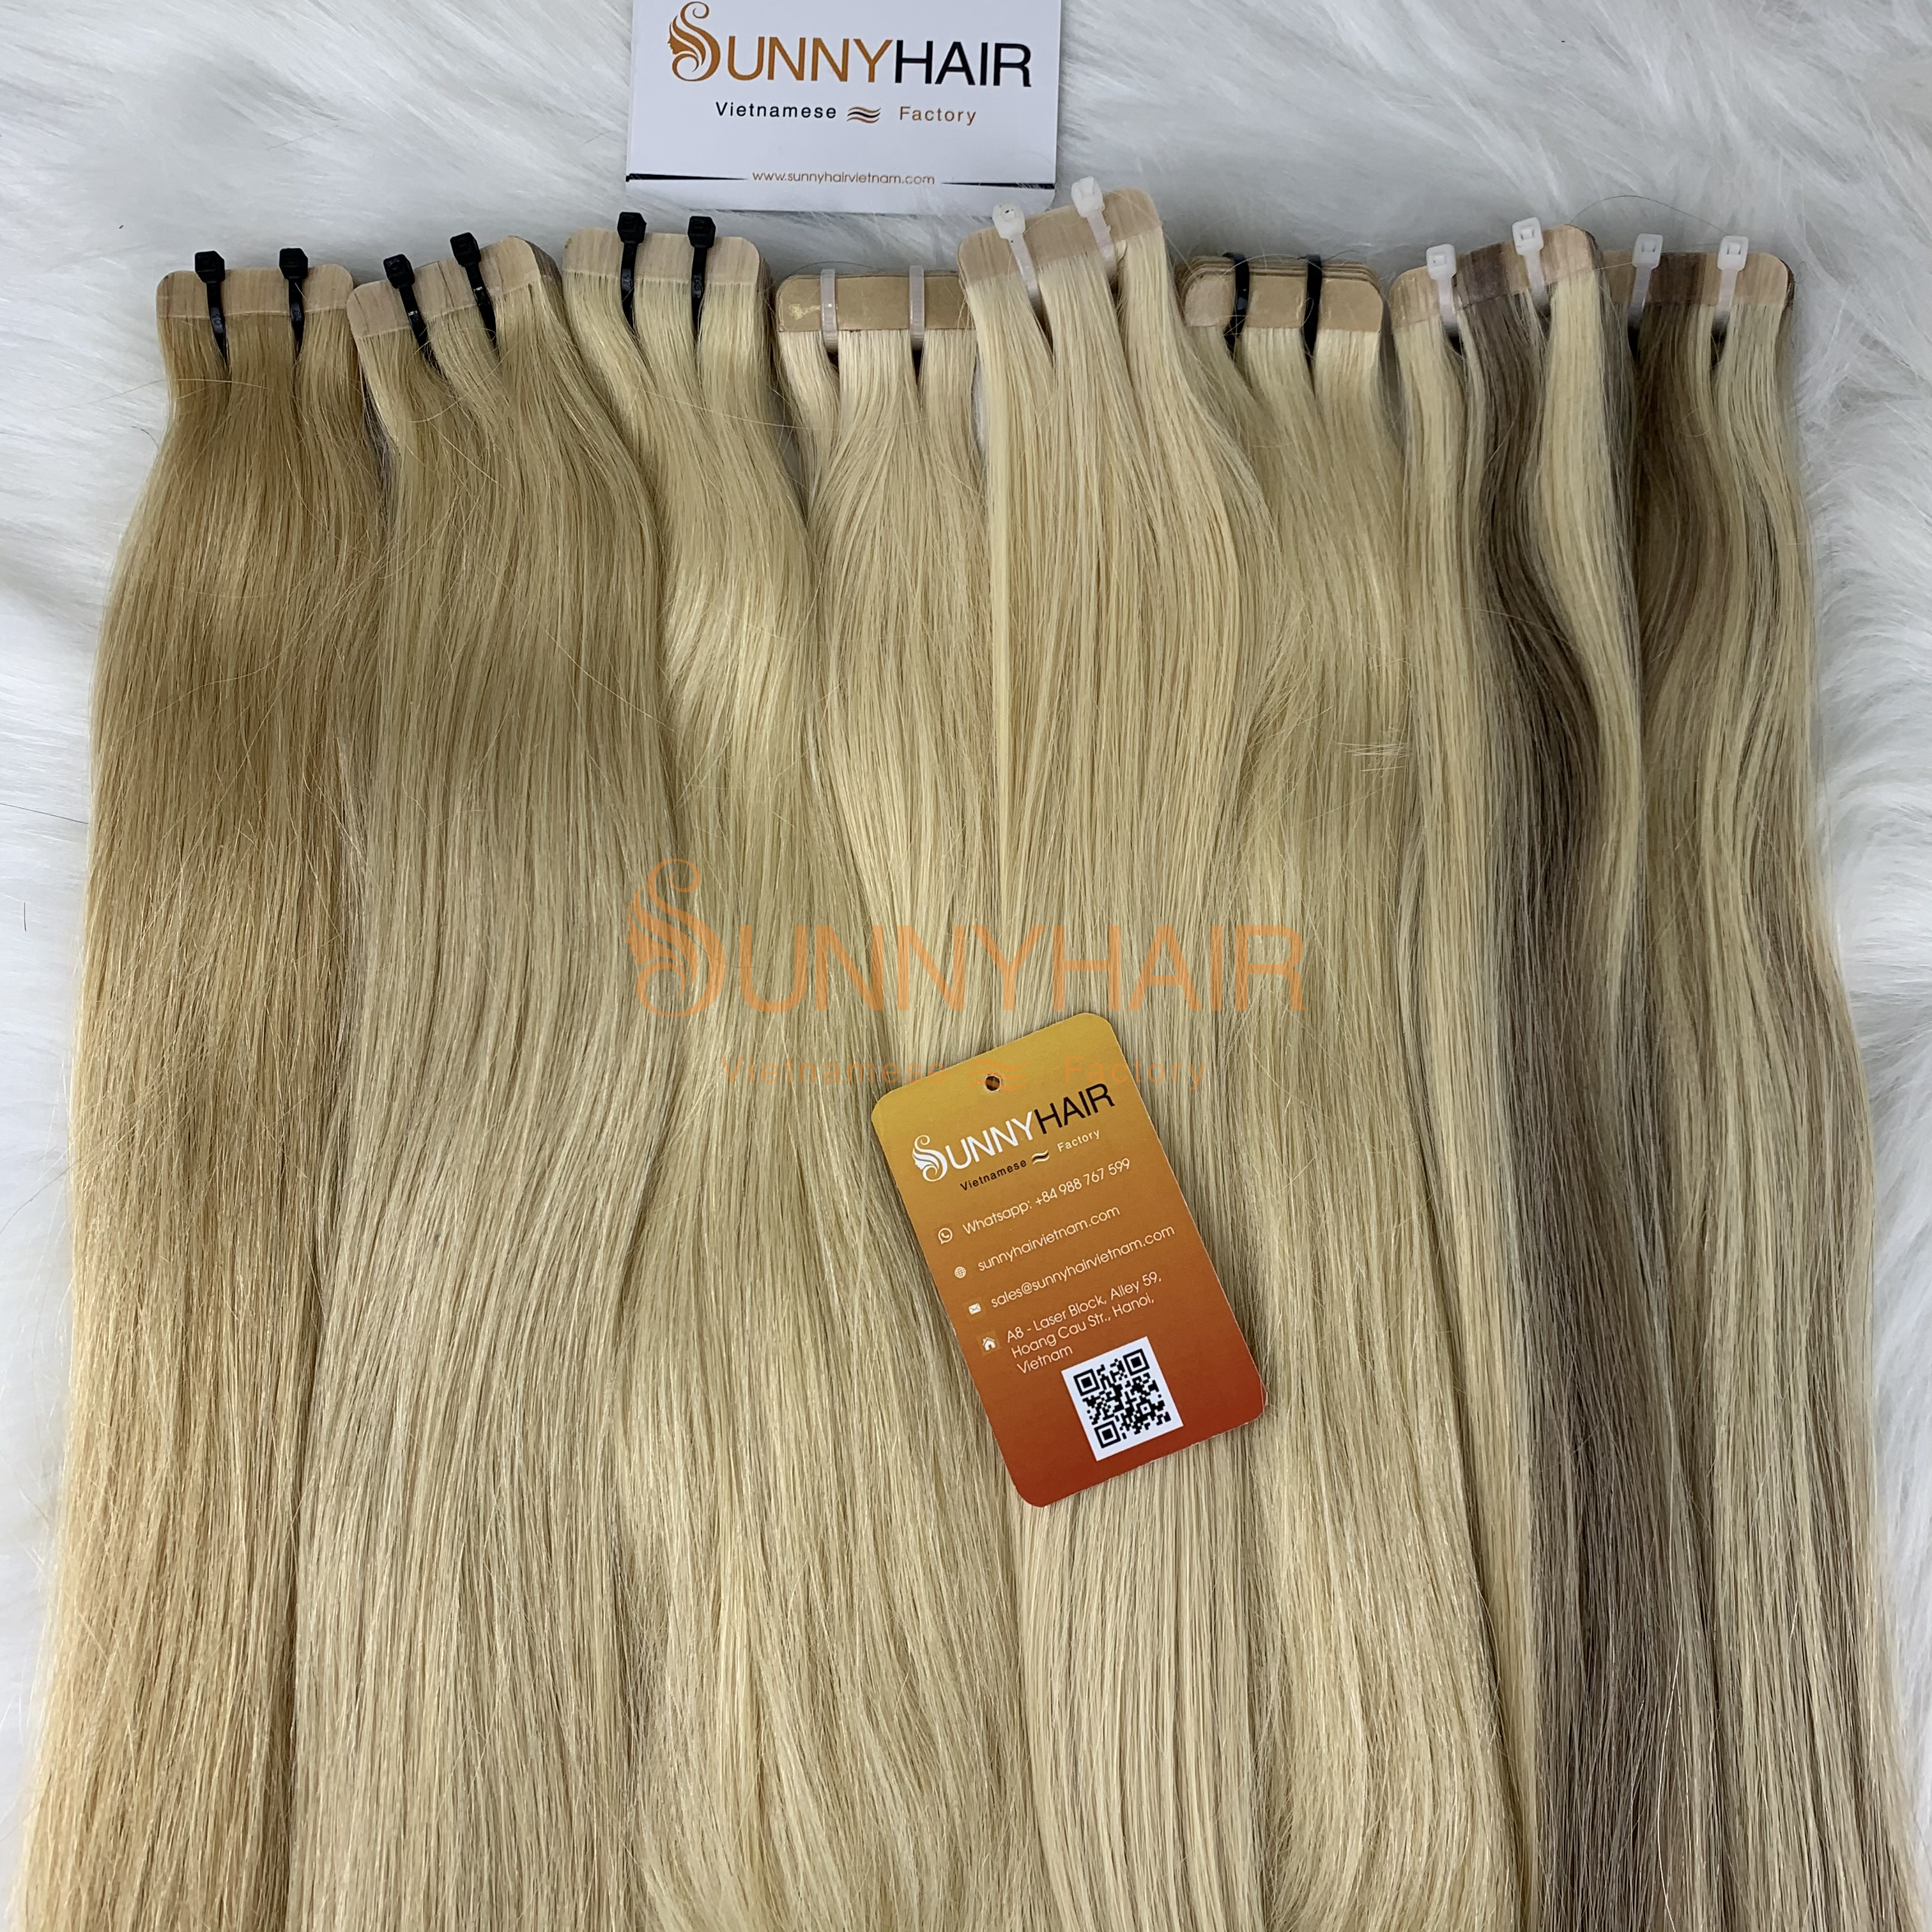 Vietnam Human Hair Extension 2.5g piece 20/40pcs set Tape-in Hair Extensions Straight